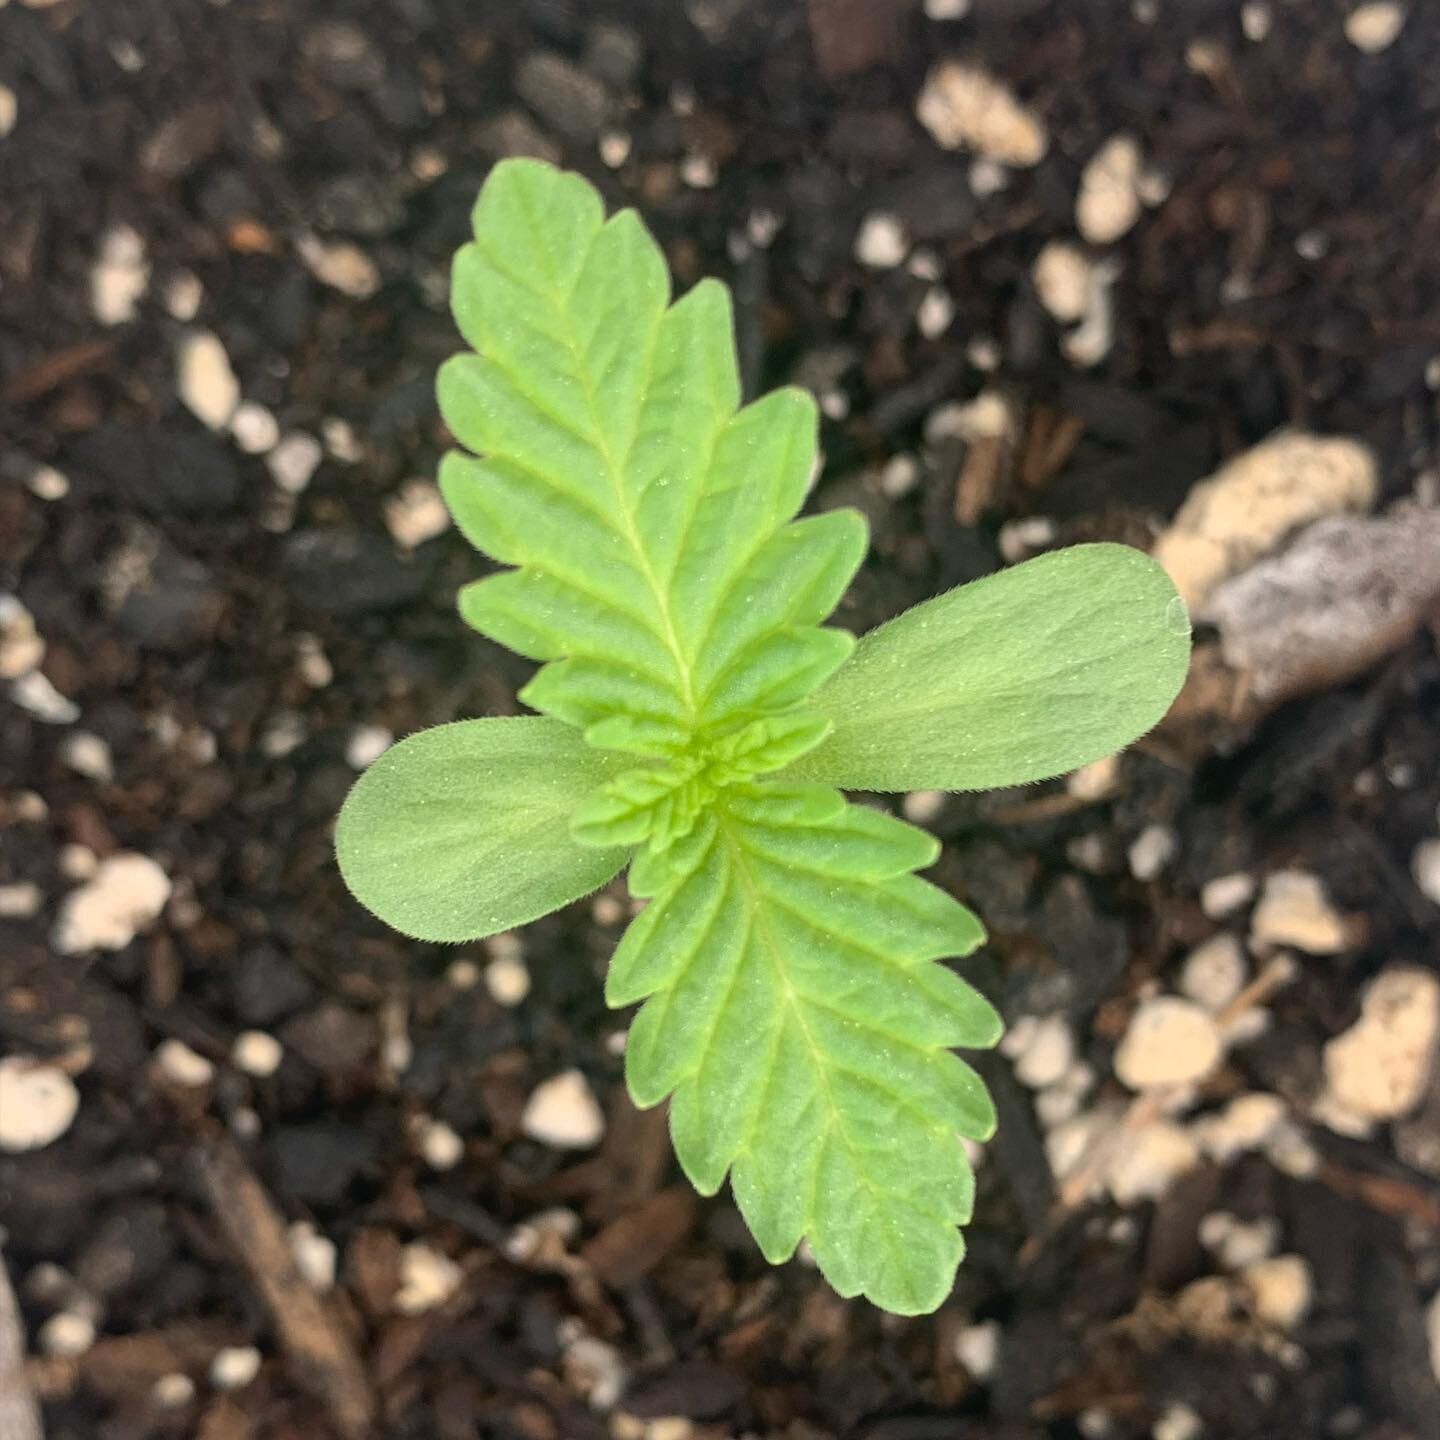 A new year of growth is starting on the farm.  2019 was a year to remember, making new friends that I will never forget. Excited for all the new growth 2020 brings!!! @sierrasungrown  #seeds #cannabiscures #cbdoil #thc #organicfood #livingsoils #natu